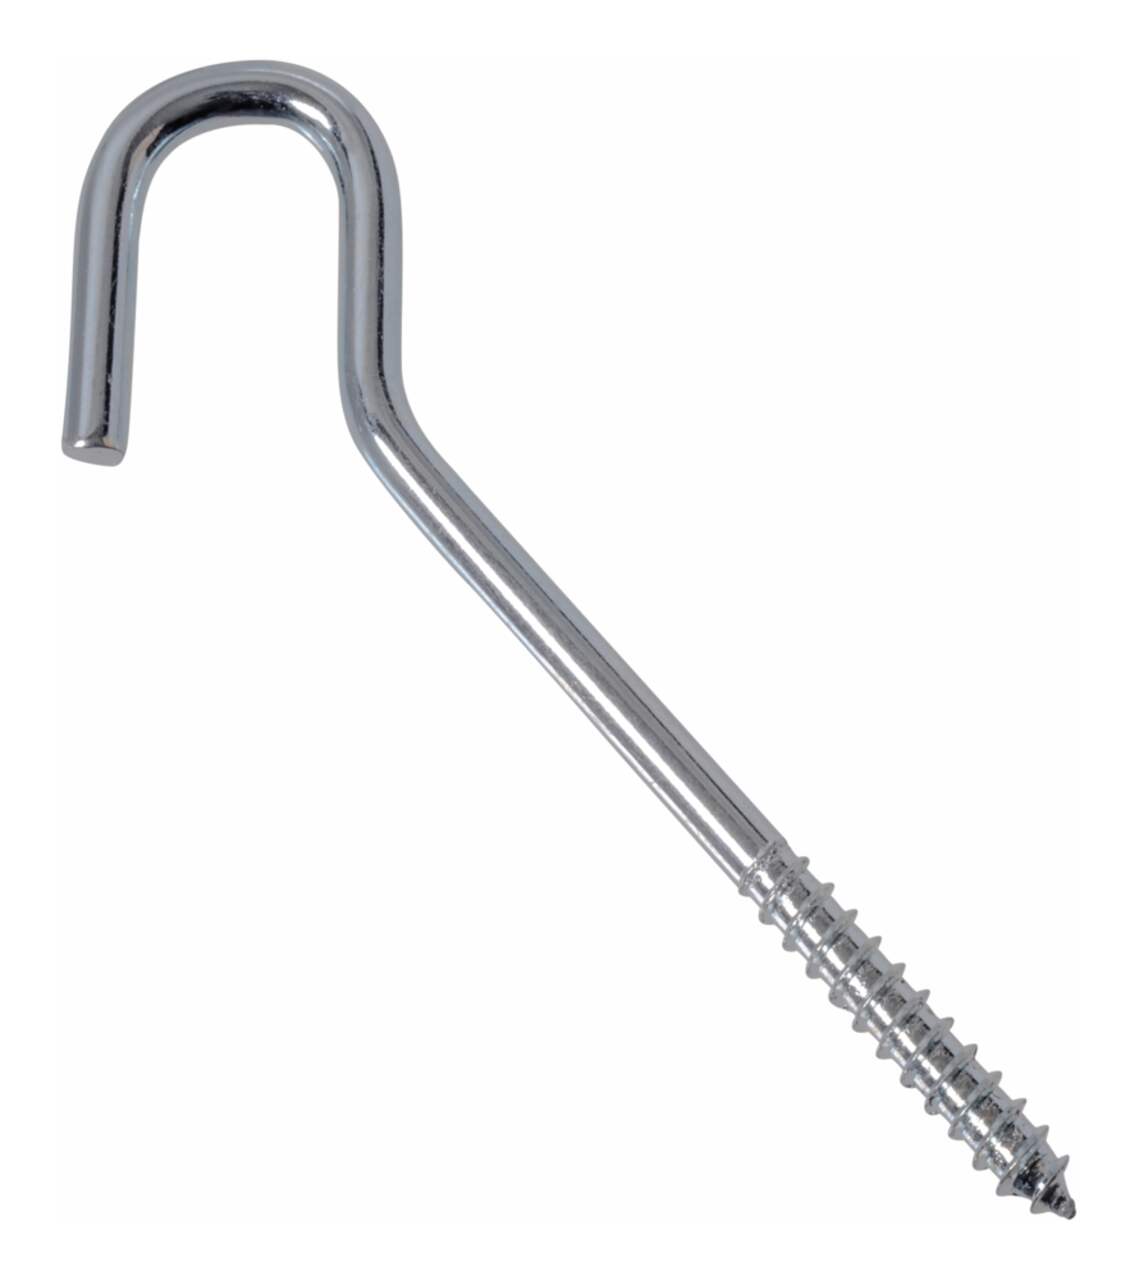 https://media-www.canadiantire.ca/product/fixing/hardware/general-hardware/0611976/4-1-4-lag-clothes-hook-6c395f2d-9c37-4526-982a-b62d2ba80856.png?imdensity=1&imwidth=640&impolicy=mZoom